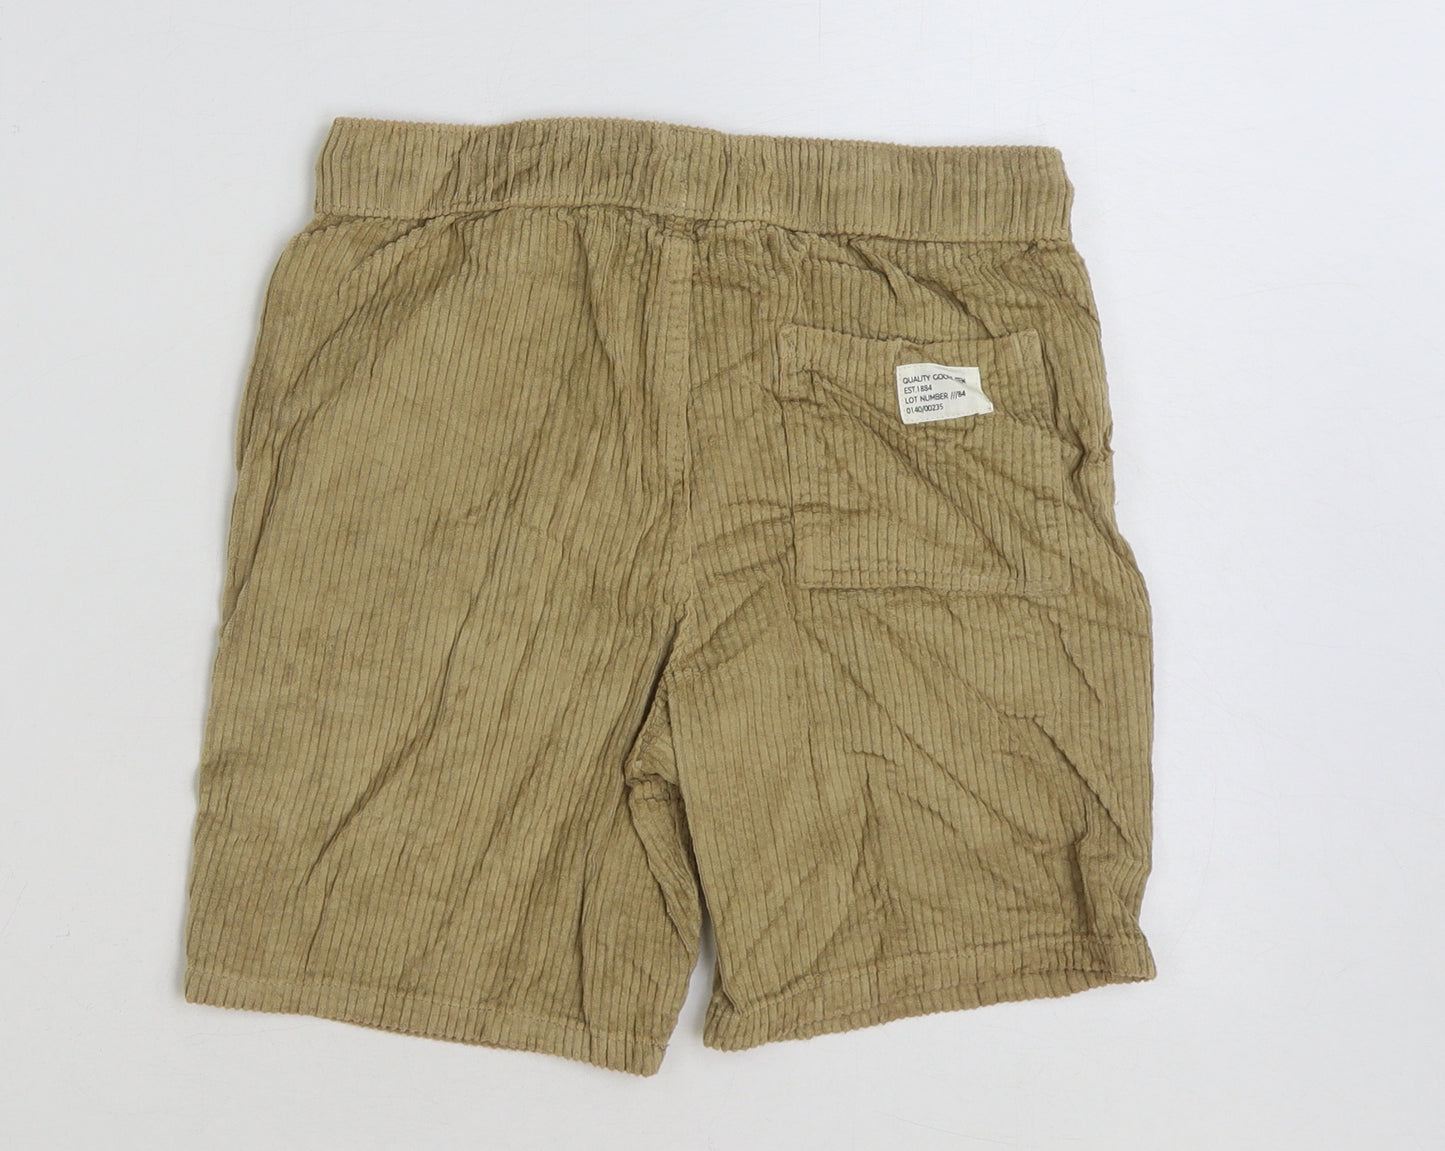 Marks and Spencer Boys Beige Cotton Sweat Shorts Size 9-10 Years Regular Drawstring